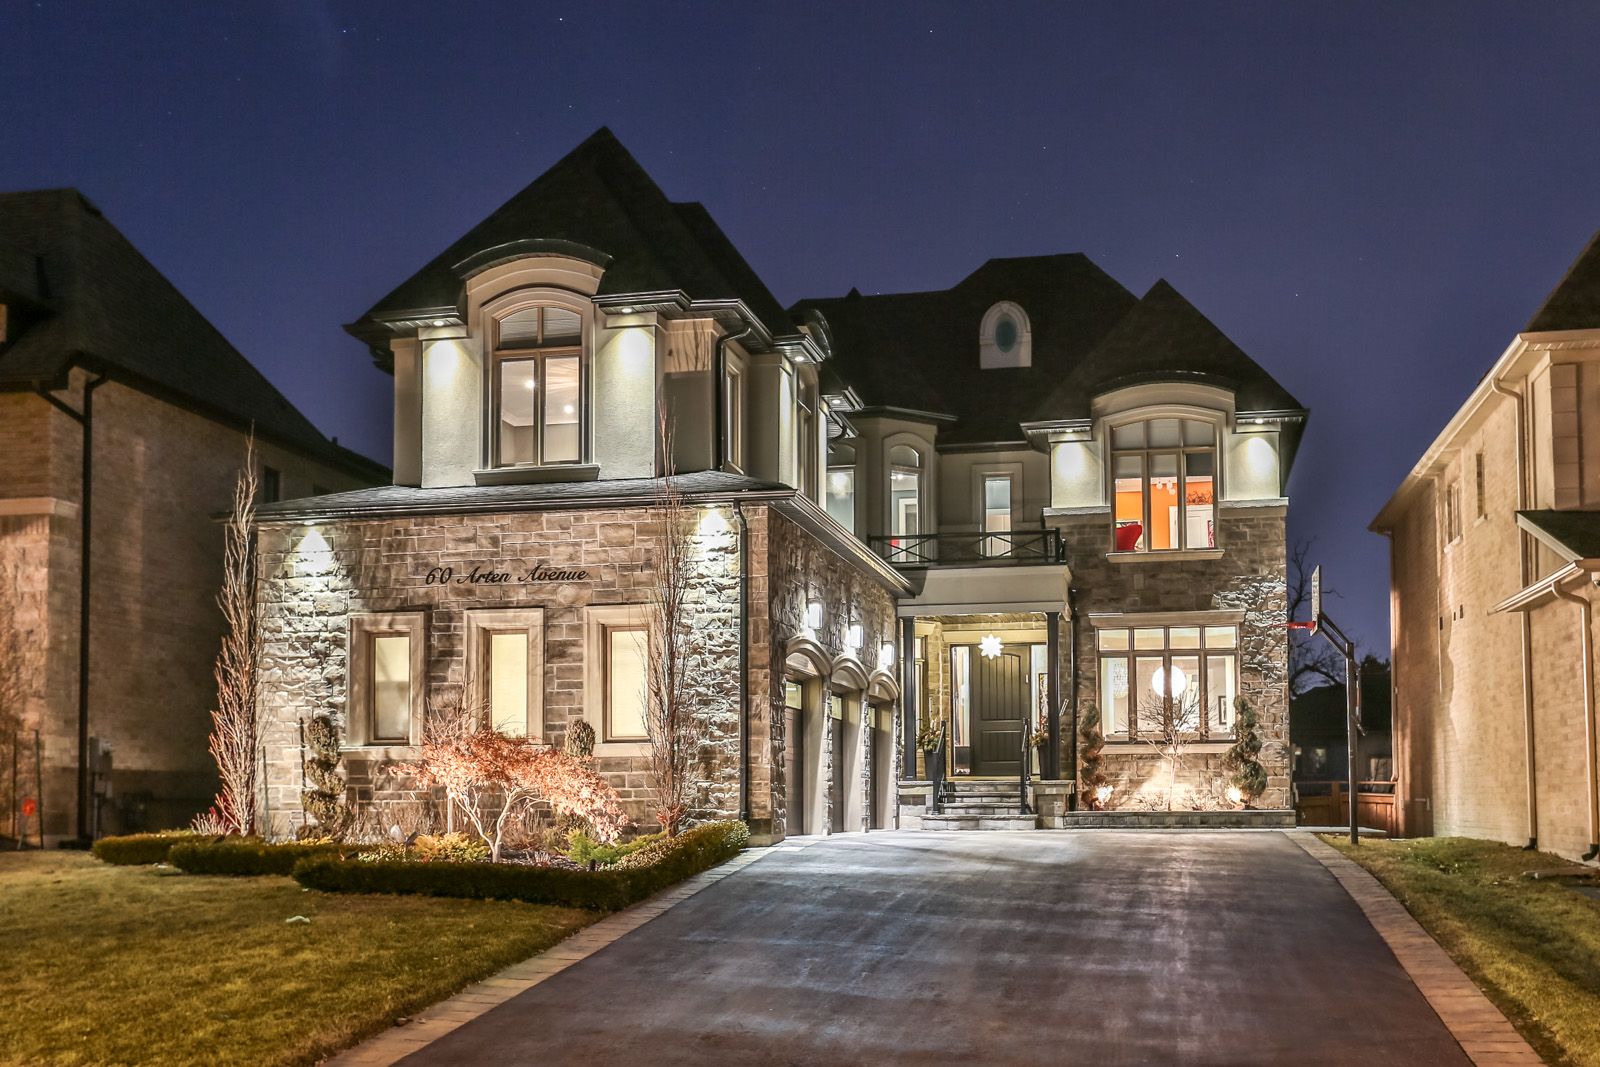 Home of the Week: An Entertainer’s Delight